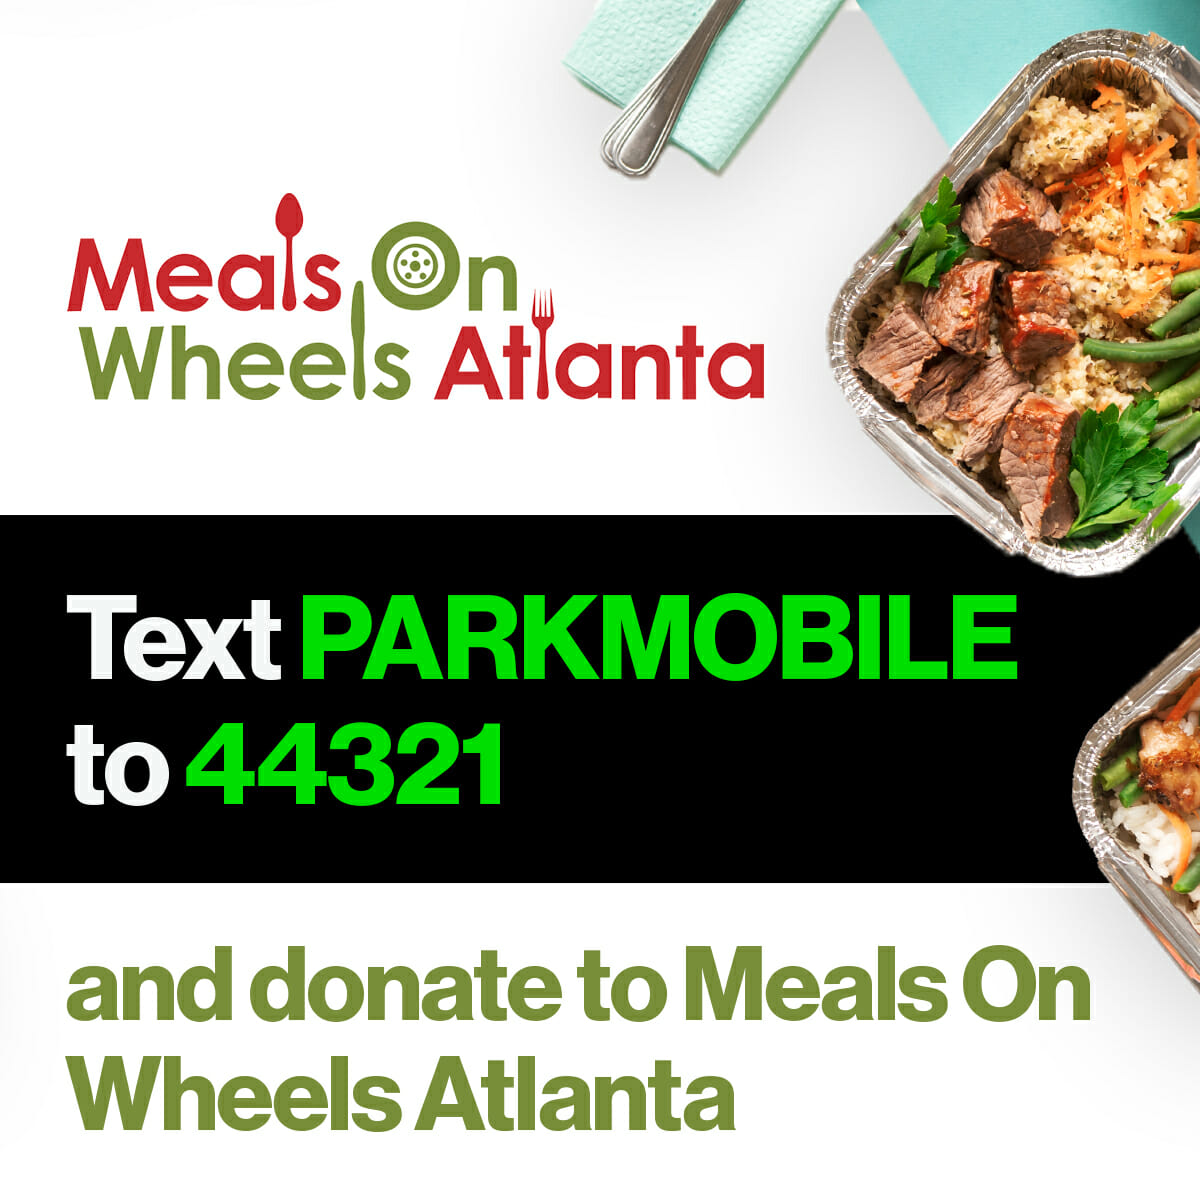 Supporting Meals On Wheels Atlanta I ParkMobile Cares